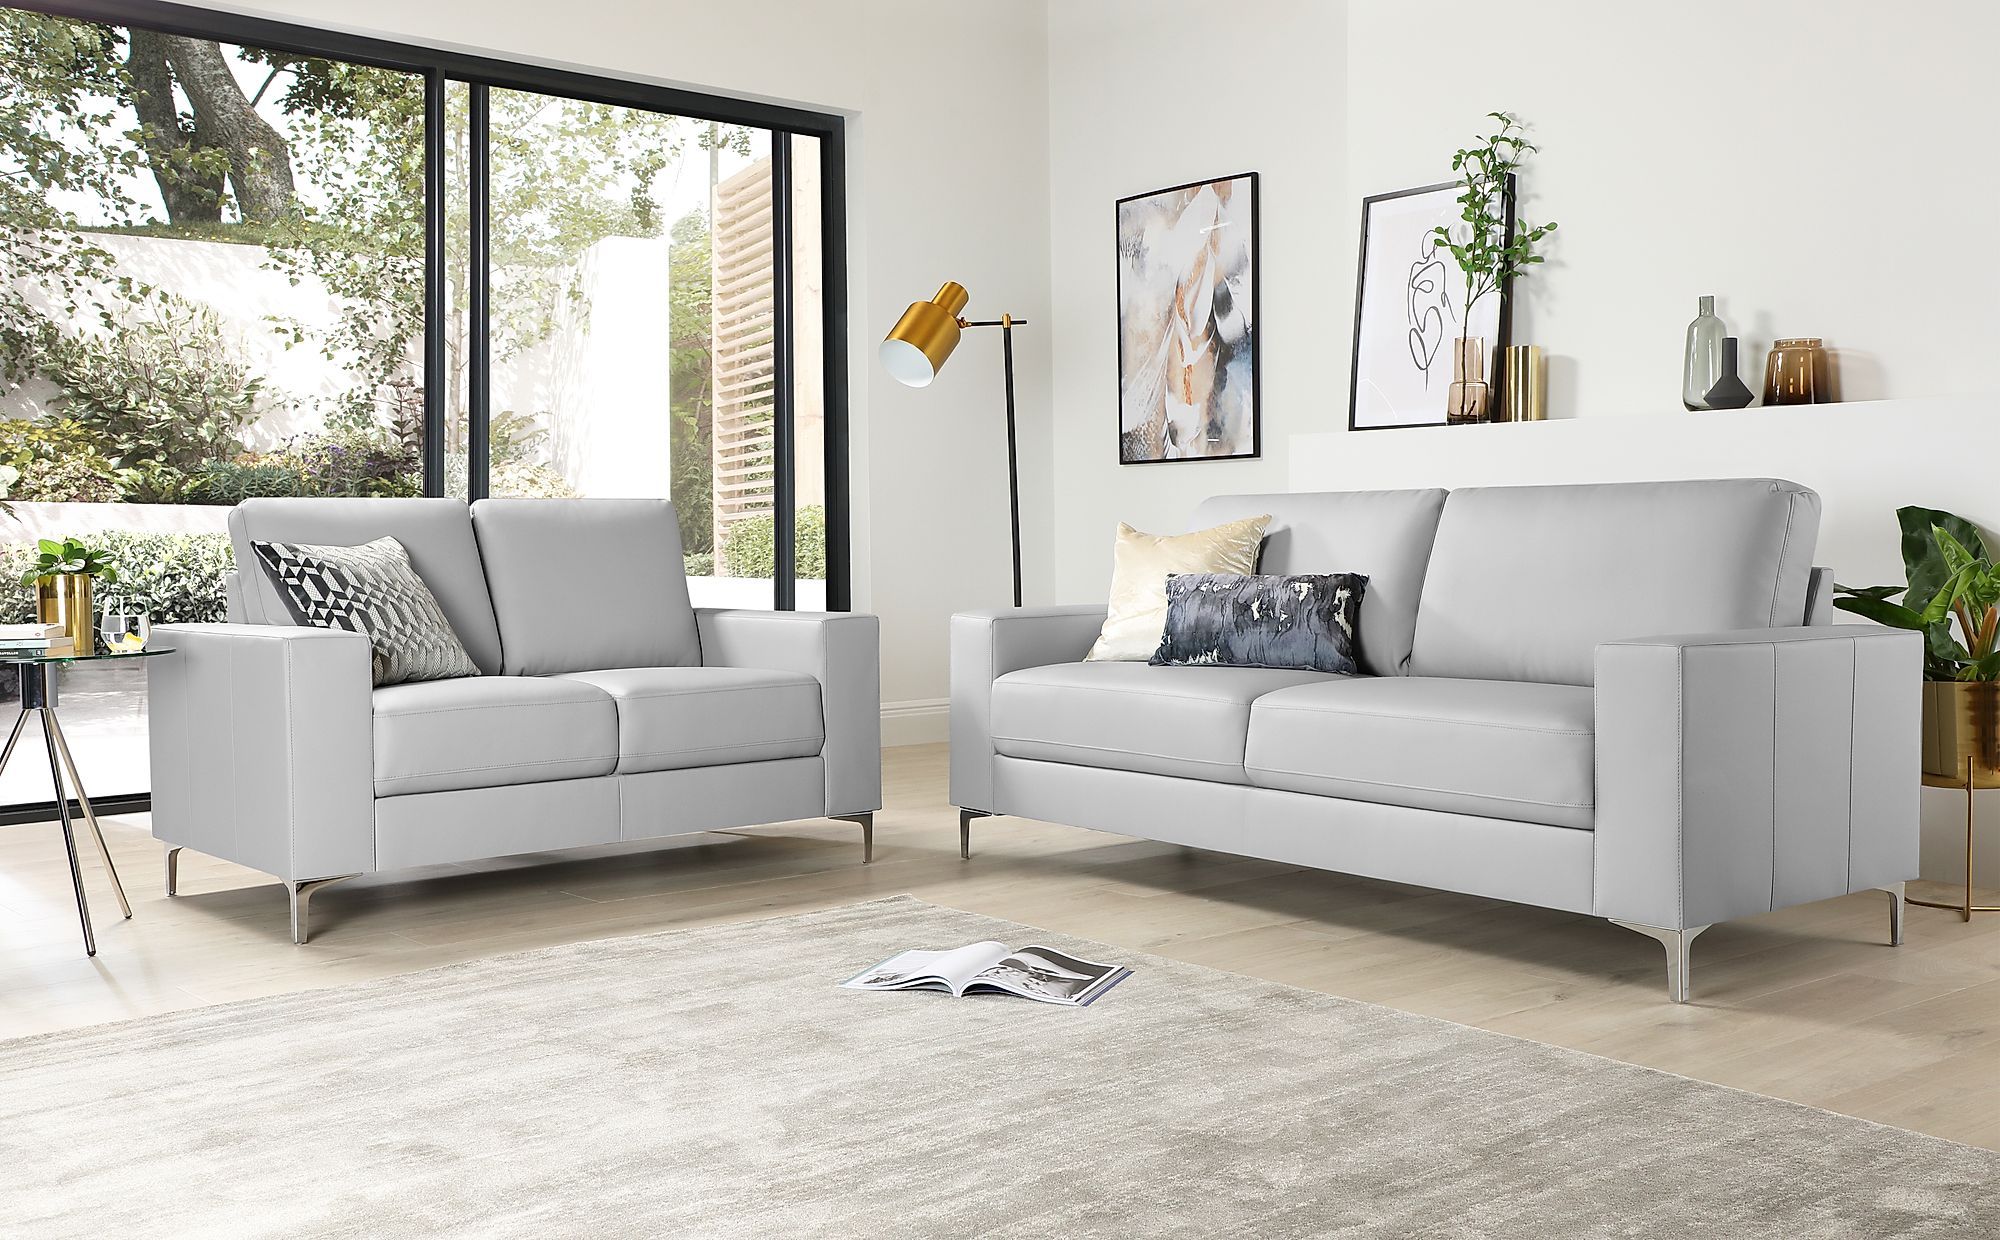 Baltimore Light Grey Leather 3+2 Seater Sofa Set | Furniture Choice Intended For Sofas In Light Gray (Gallery 7 of 22)